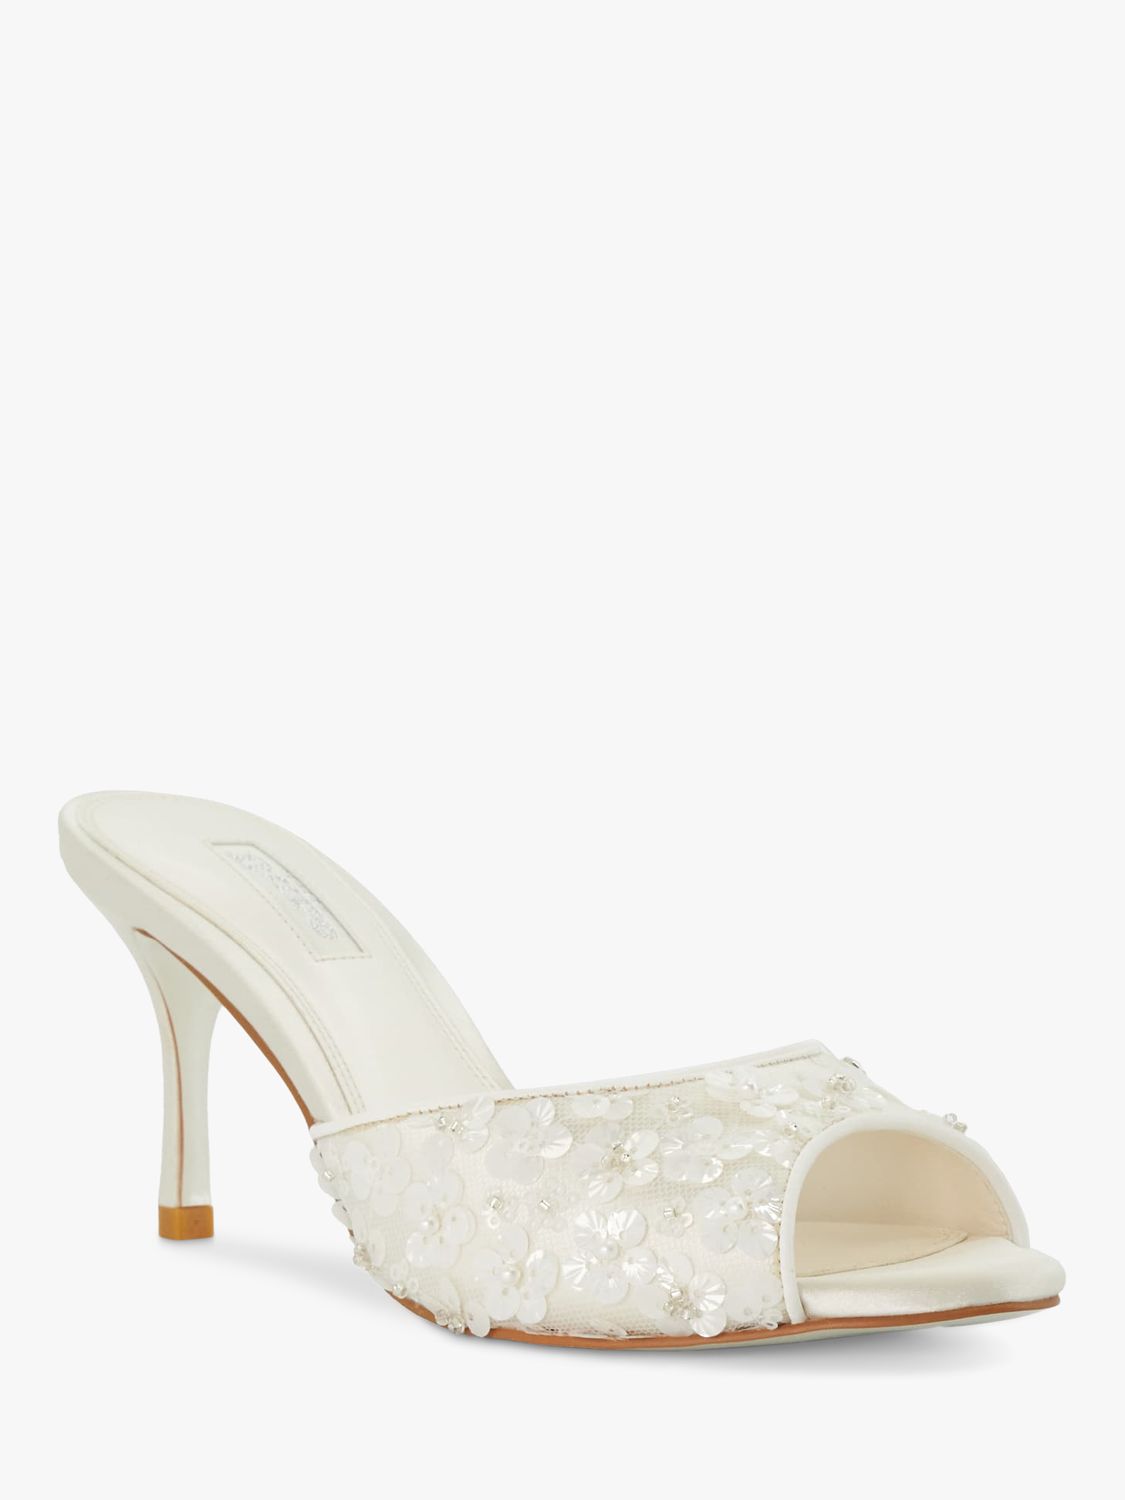 Buy Dune Bridal Collection Minimoon Sequin Embellished Mules, Ivory Online at johnlewis.com